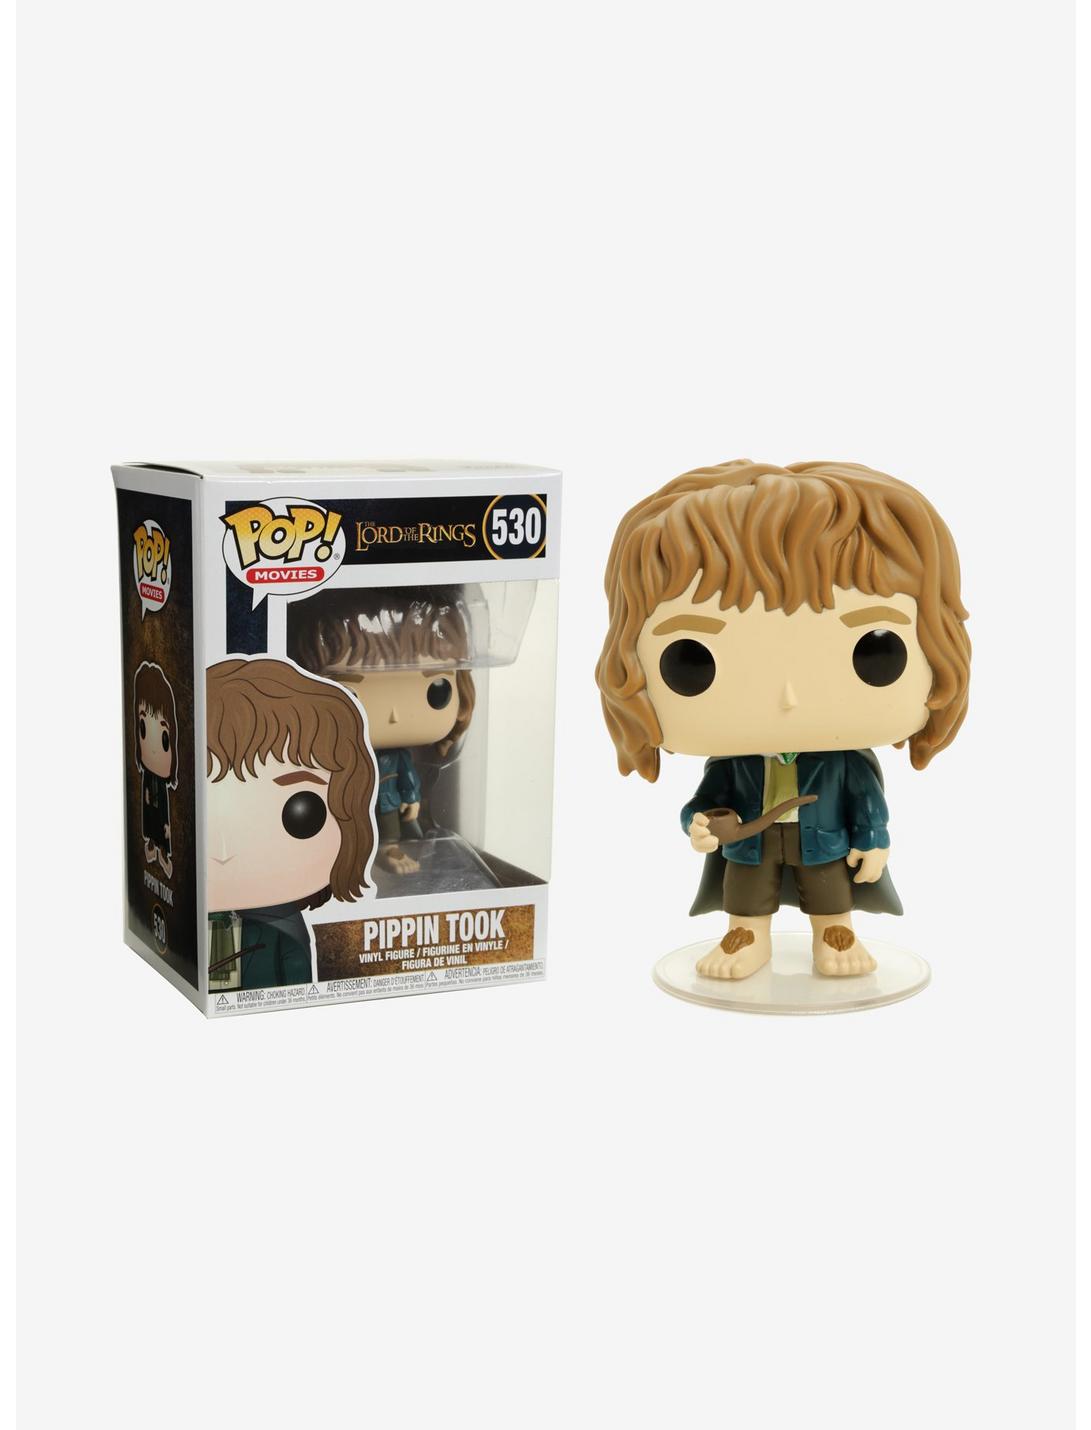 Funko The Lord Of The Rings Pop! Movies Pippin Took Vinyl Figure, , hi-res